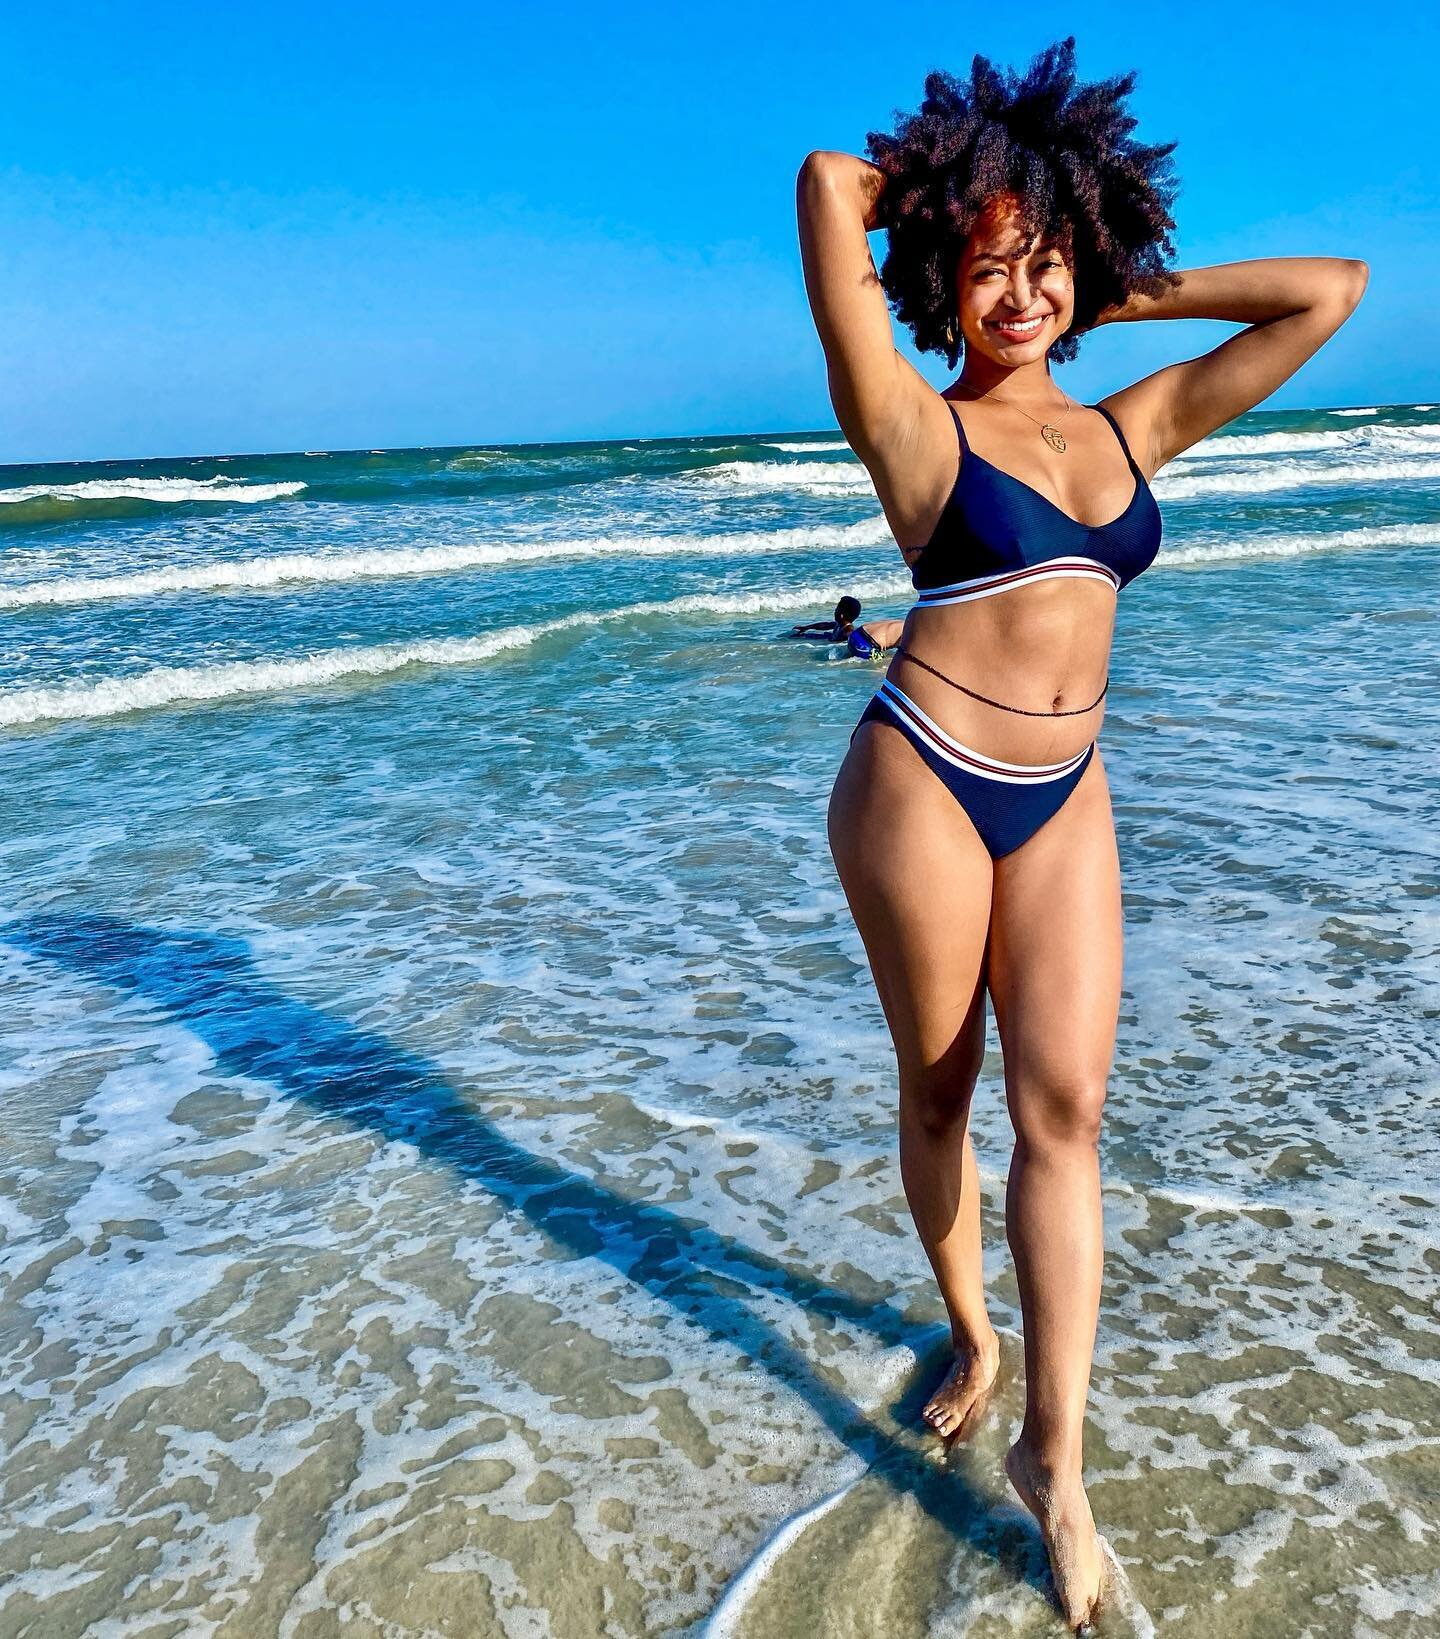 Getting back to my happy and it feels so good 😌
.
.
.
.
.
#beachbod #naturallycurly #blackwebseries #blessedwithkurls #fashionista #beachfinds #naturallyshesdope #naturalchixs #curlynaturalhair #unconditionedroots #howtonaturalhair #curlyhairmag #cu